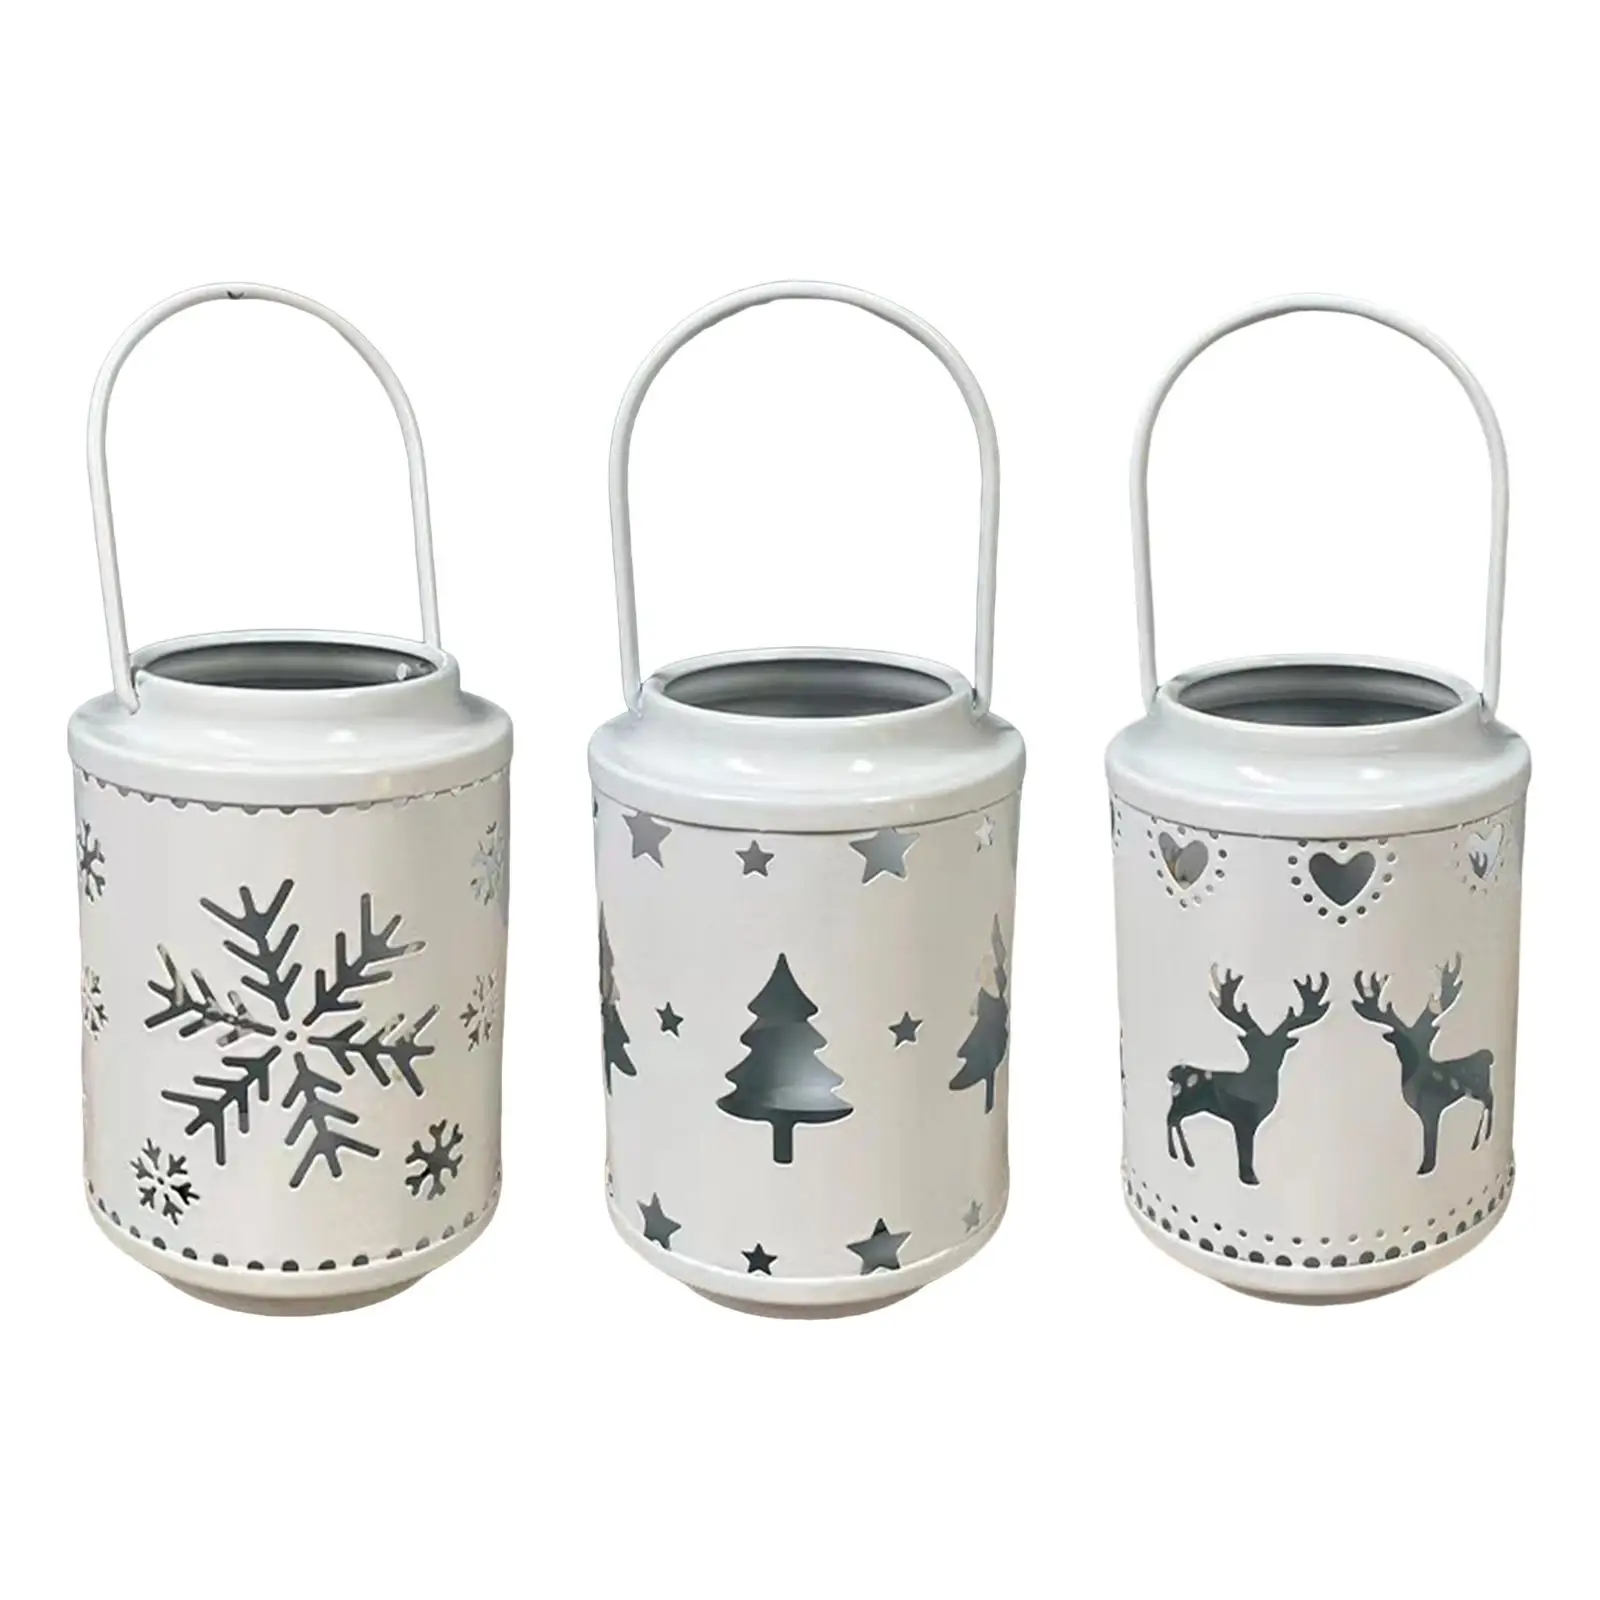 Metal Christmas Candle Lantern Candle Holders Home Decor for Outdoor